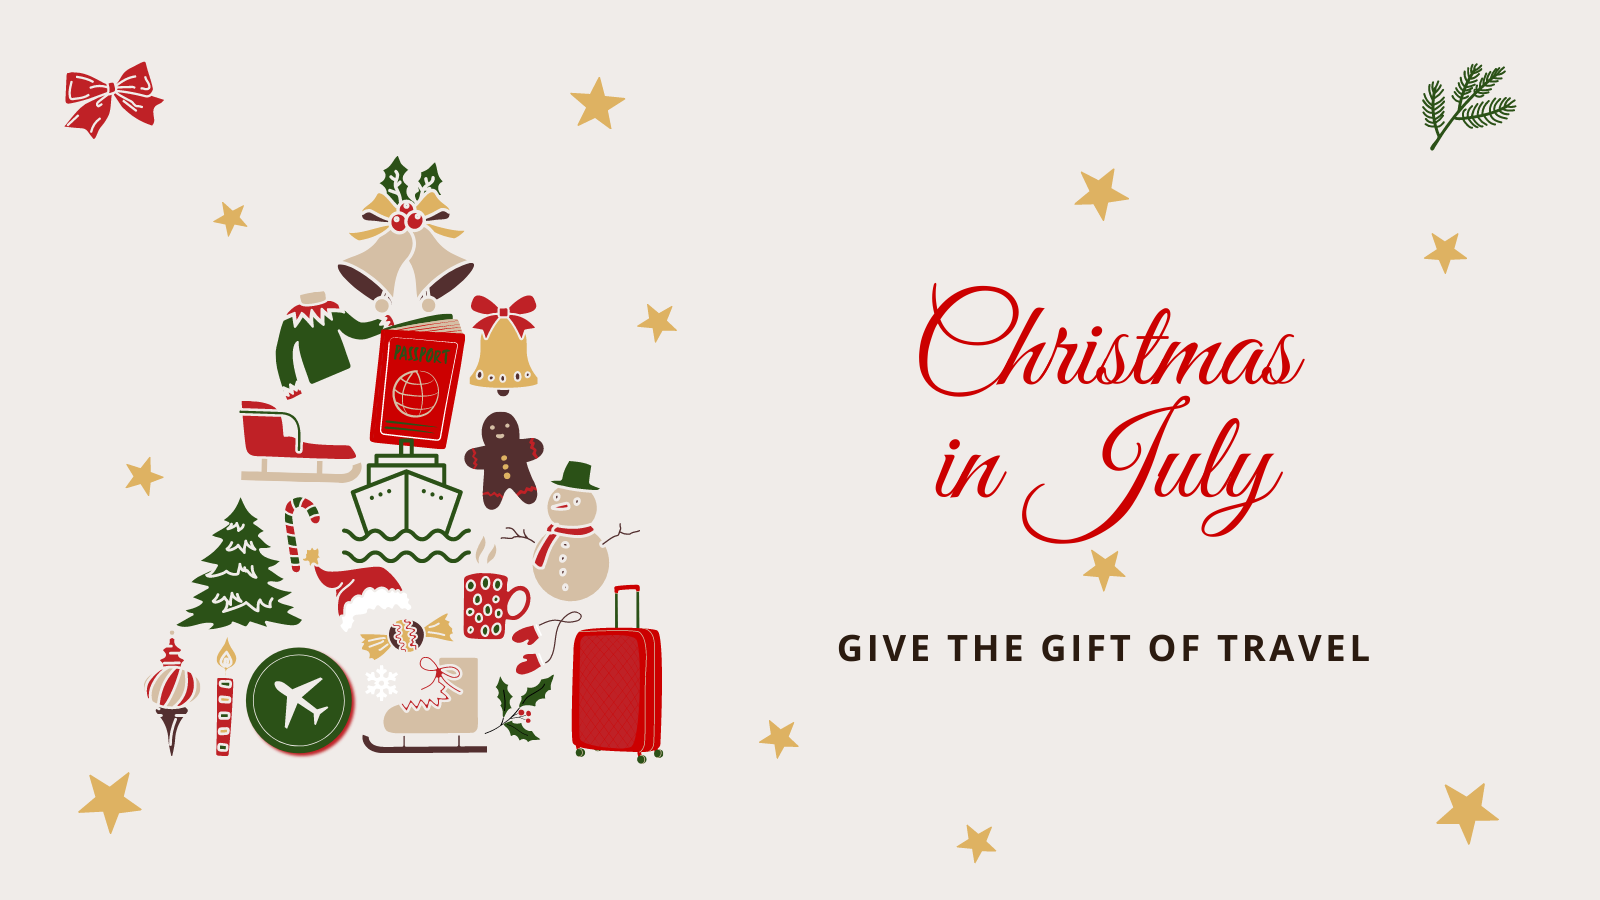 Christmas in July: Give the Gift of Travel